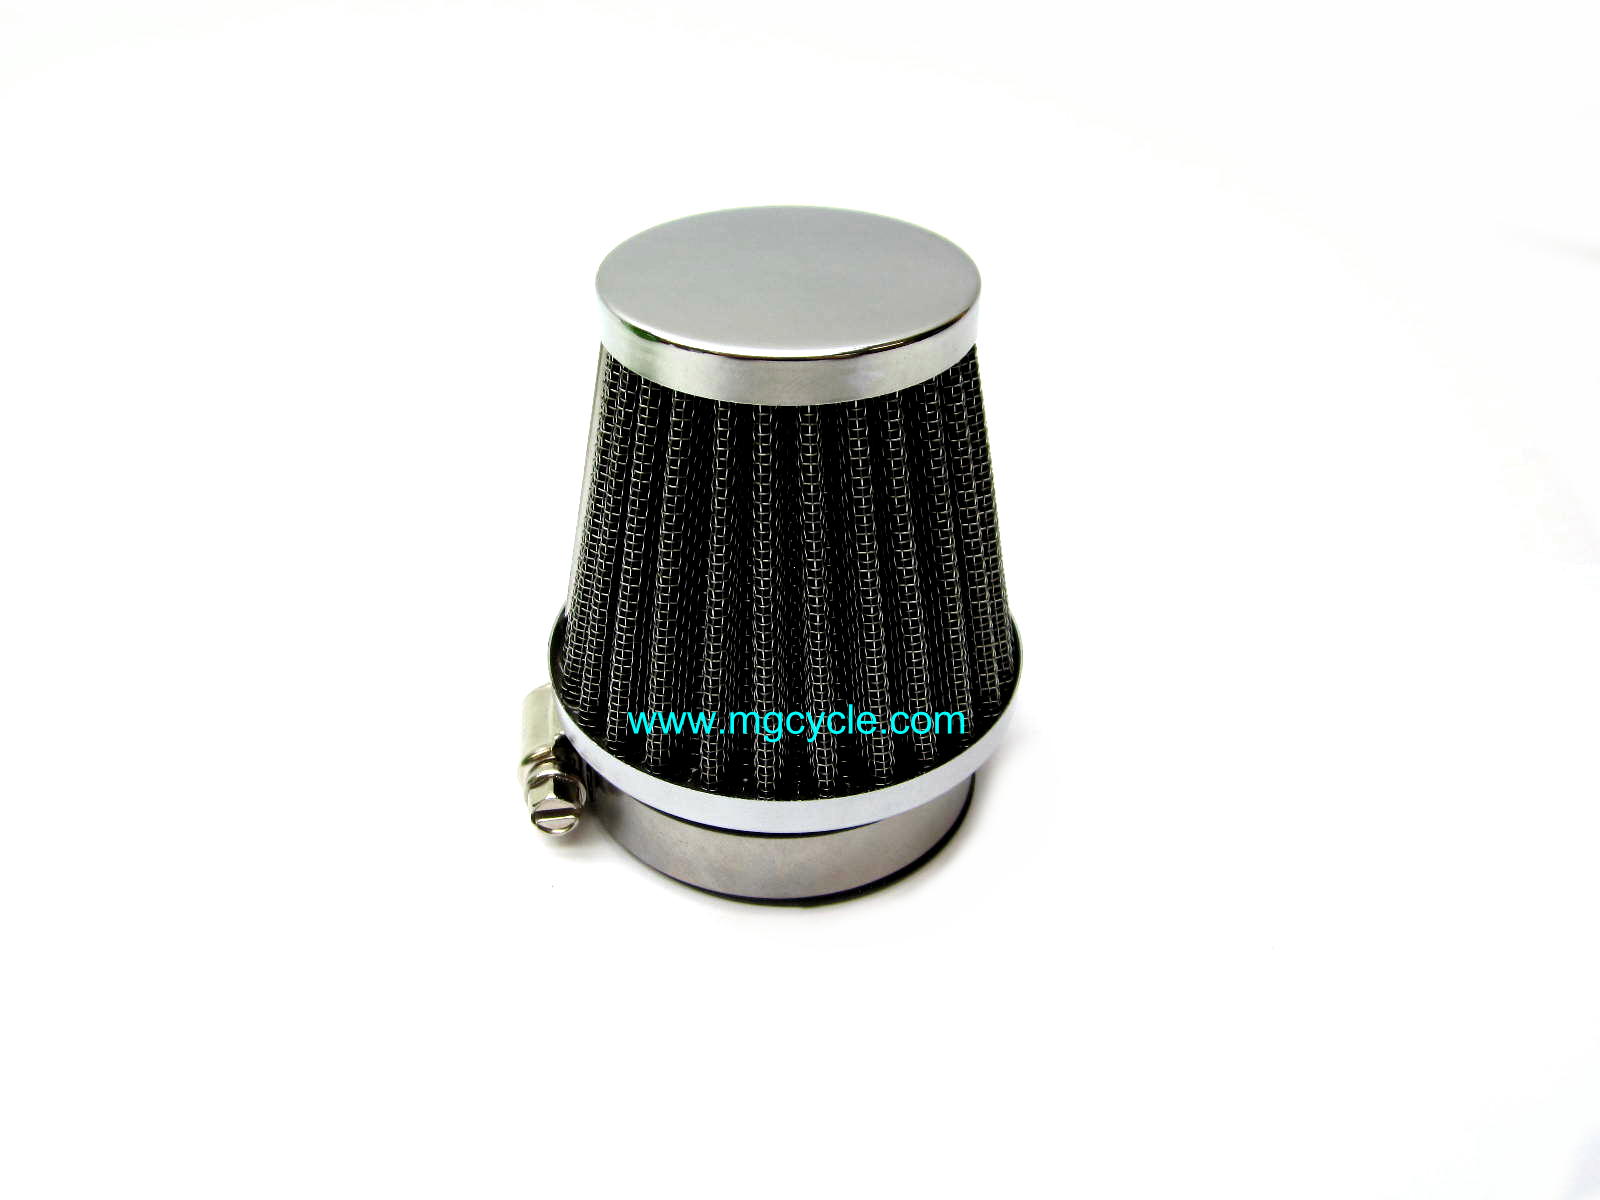 conical air filter pod for PHM38 and PHM40 carburetors - Click Image to Close